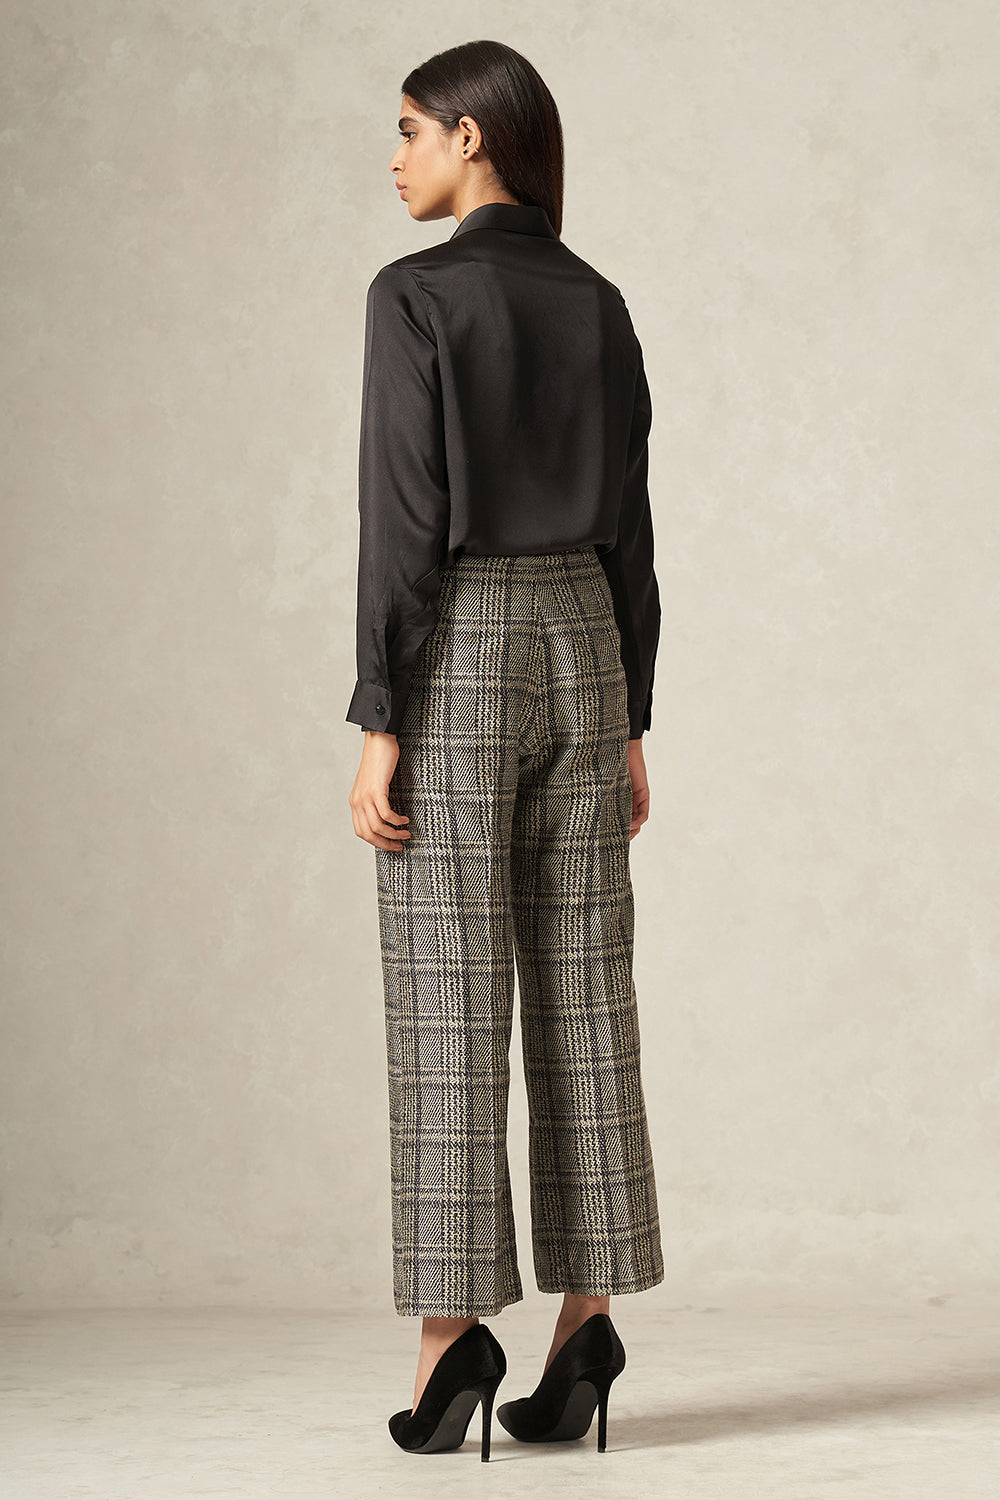 Black and White Pure Silk Handwoven Plaid Patterned Pants